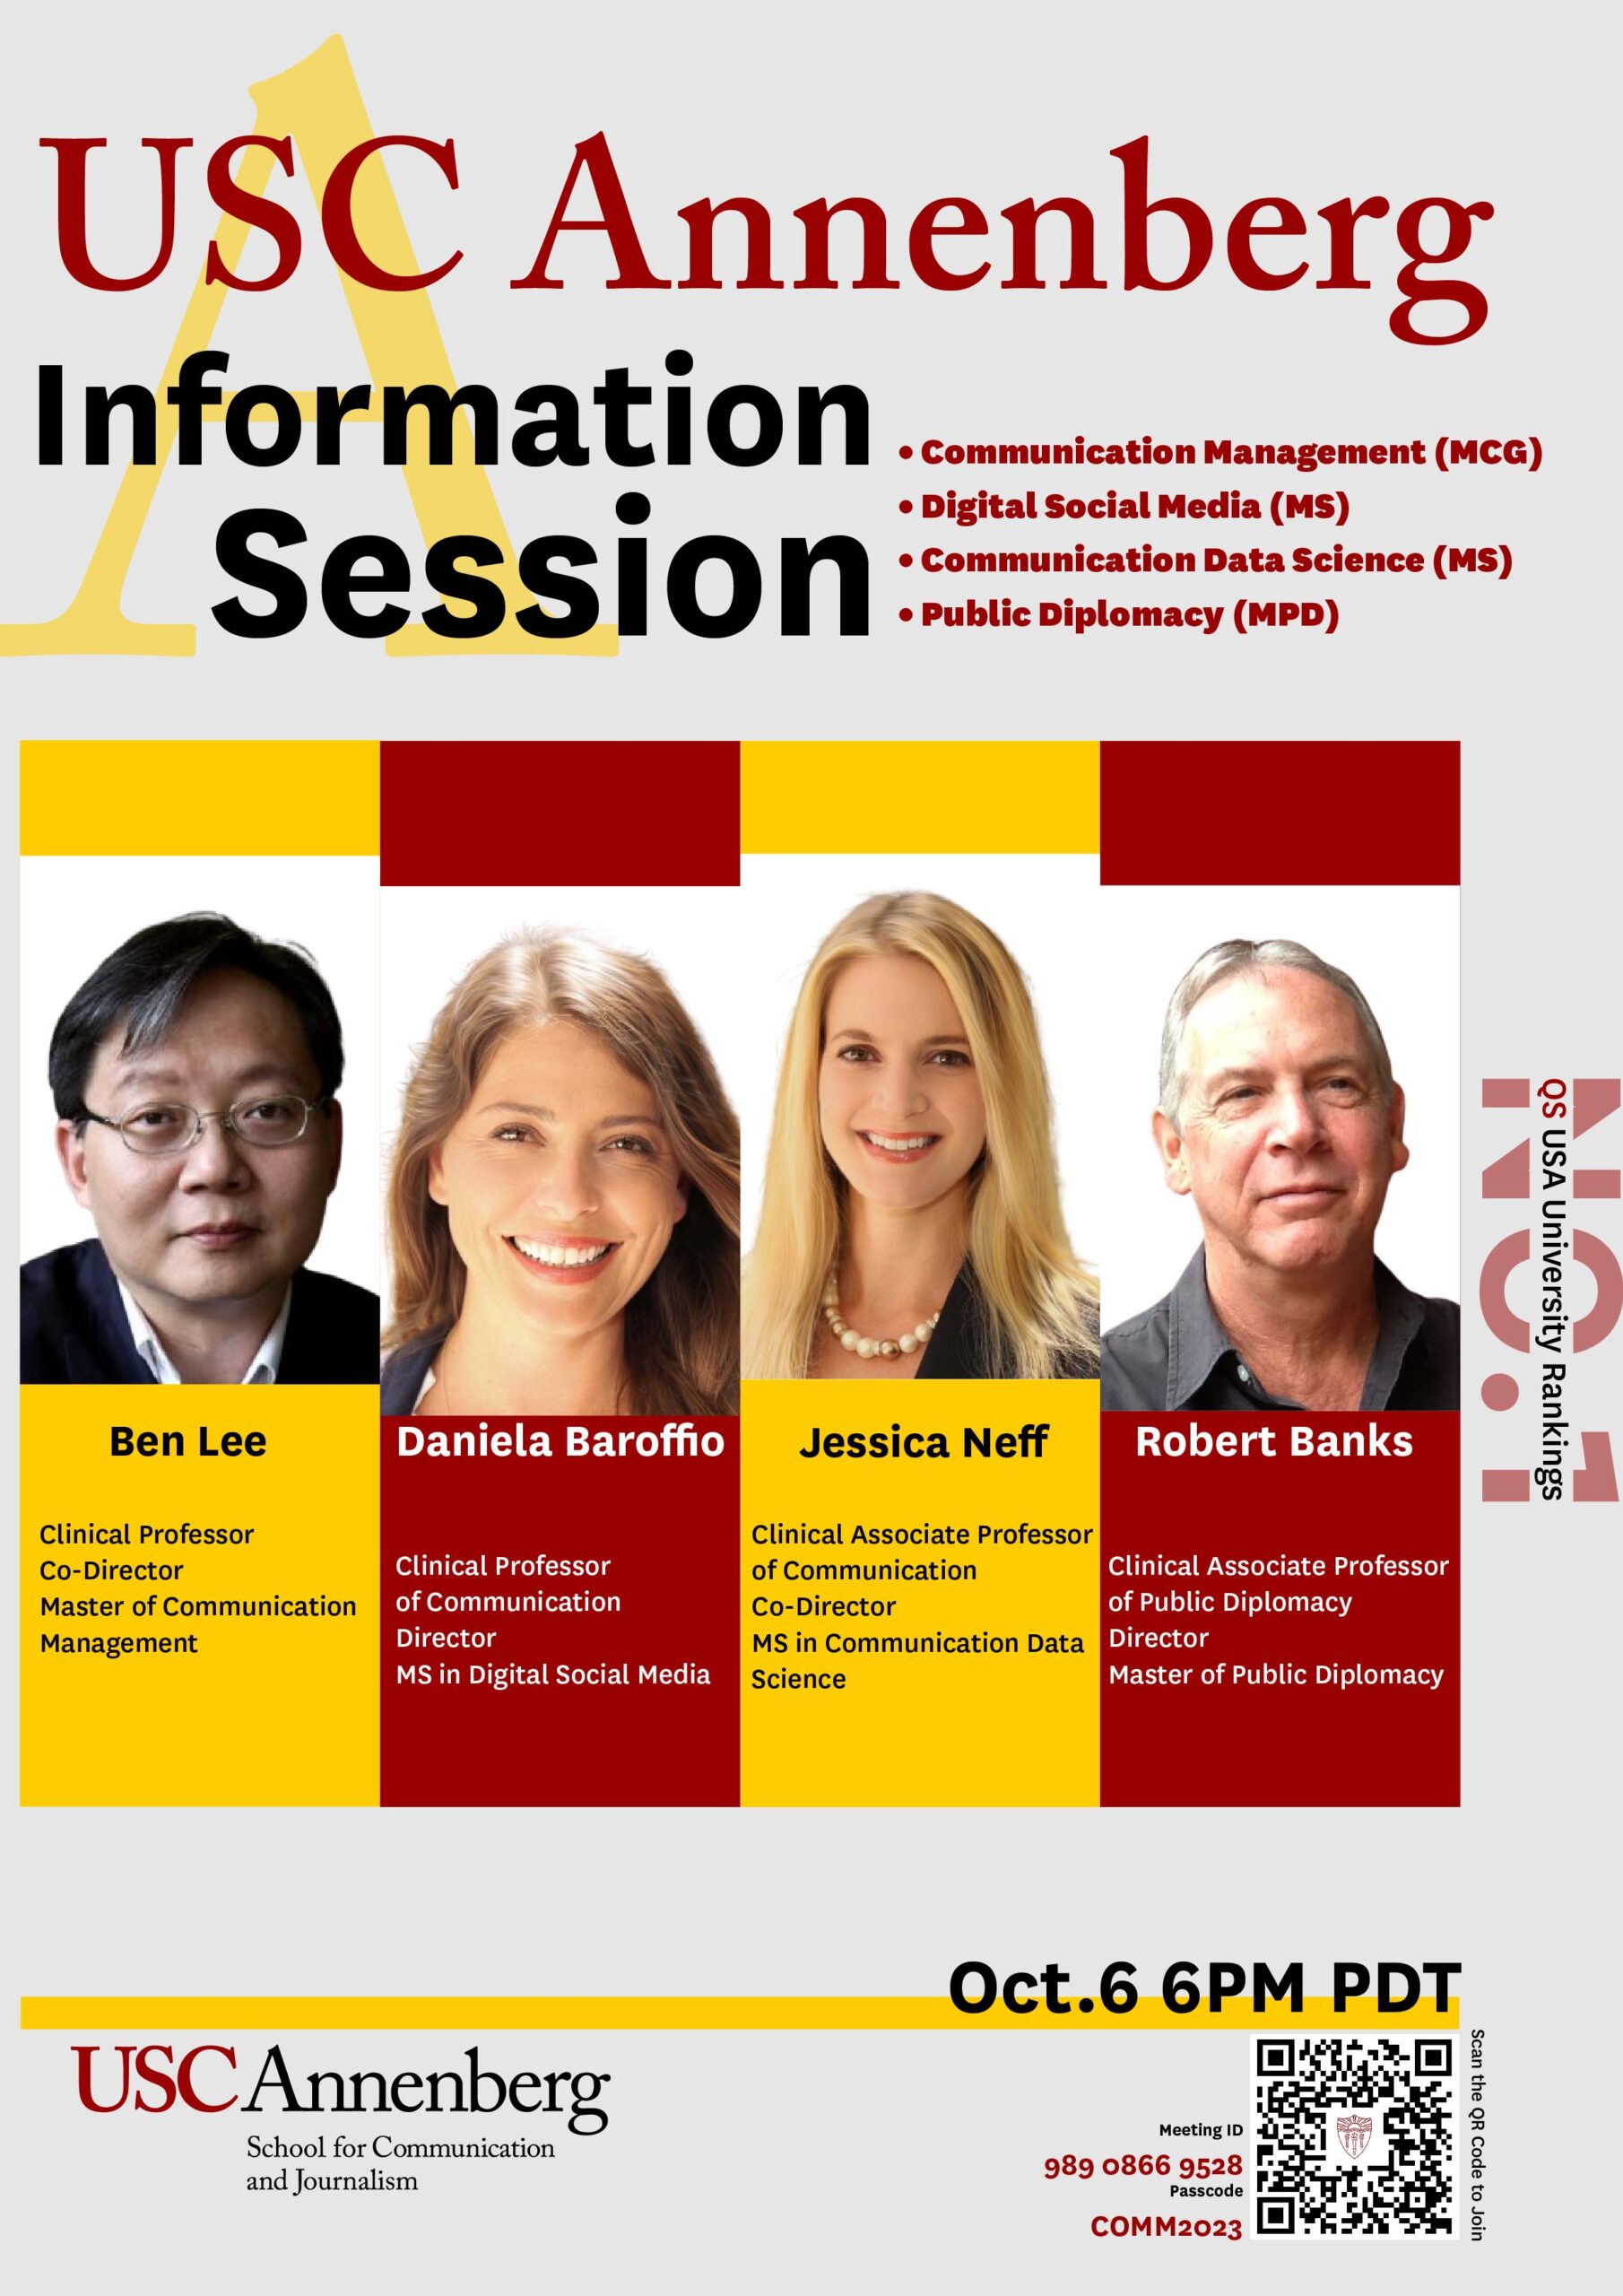 USC Annenberg Information session